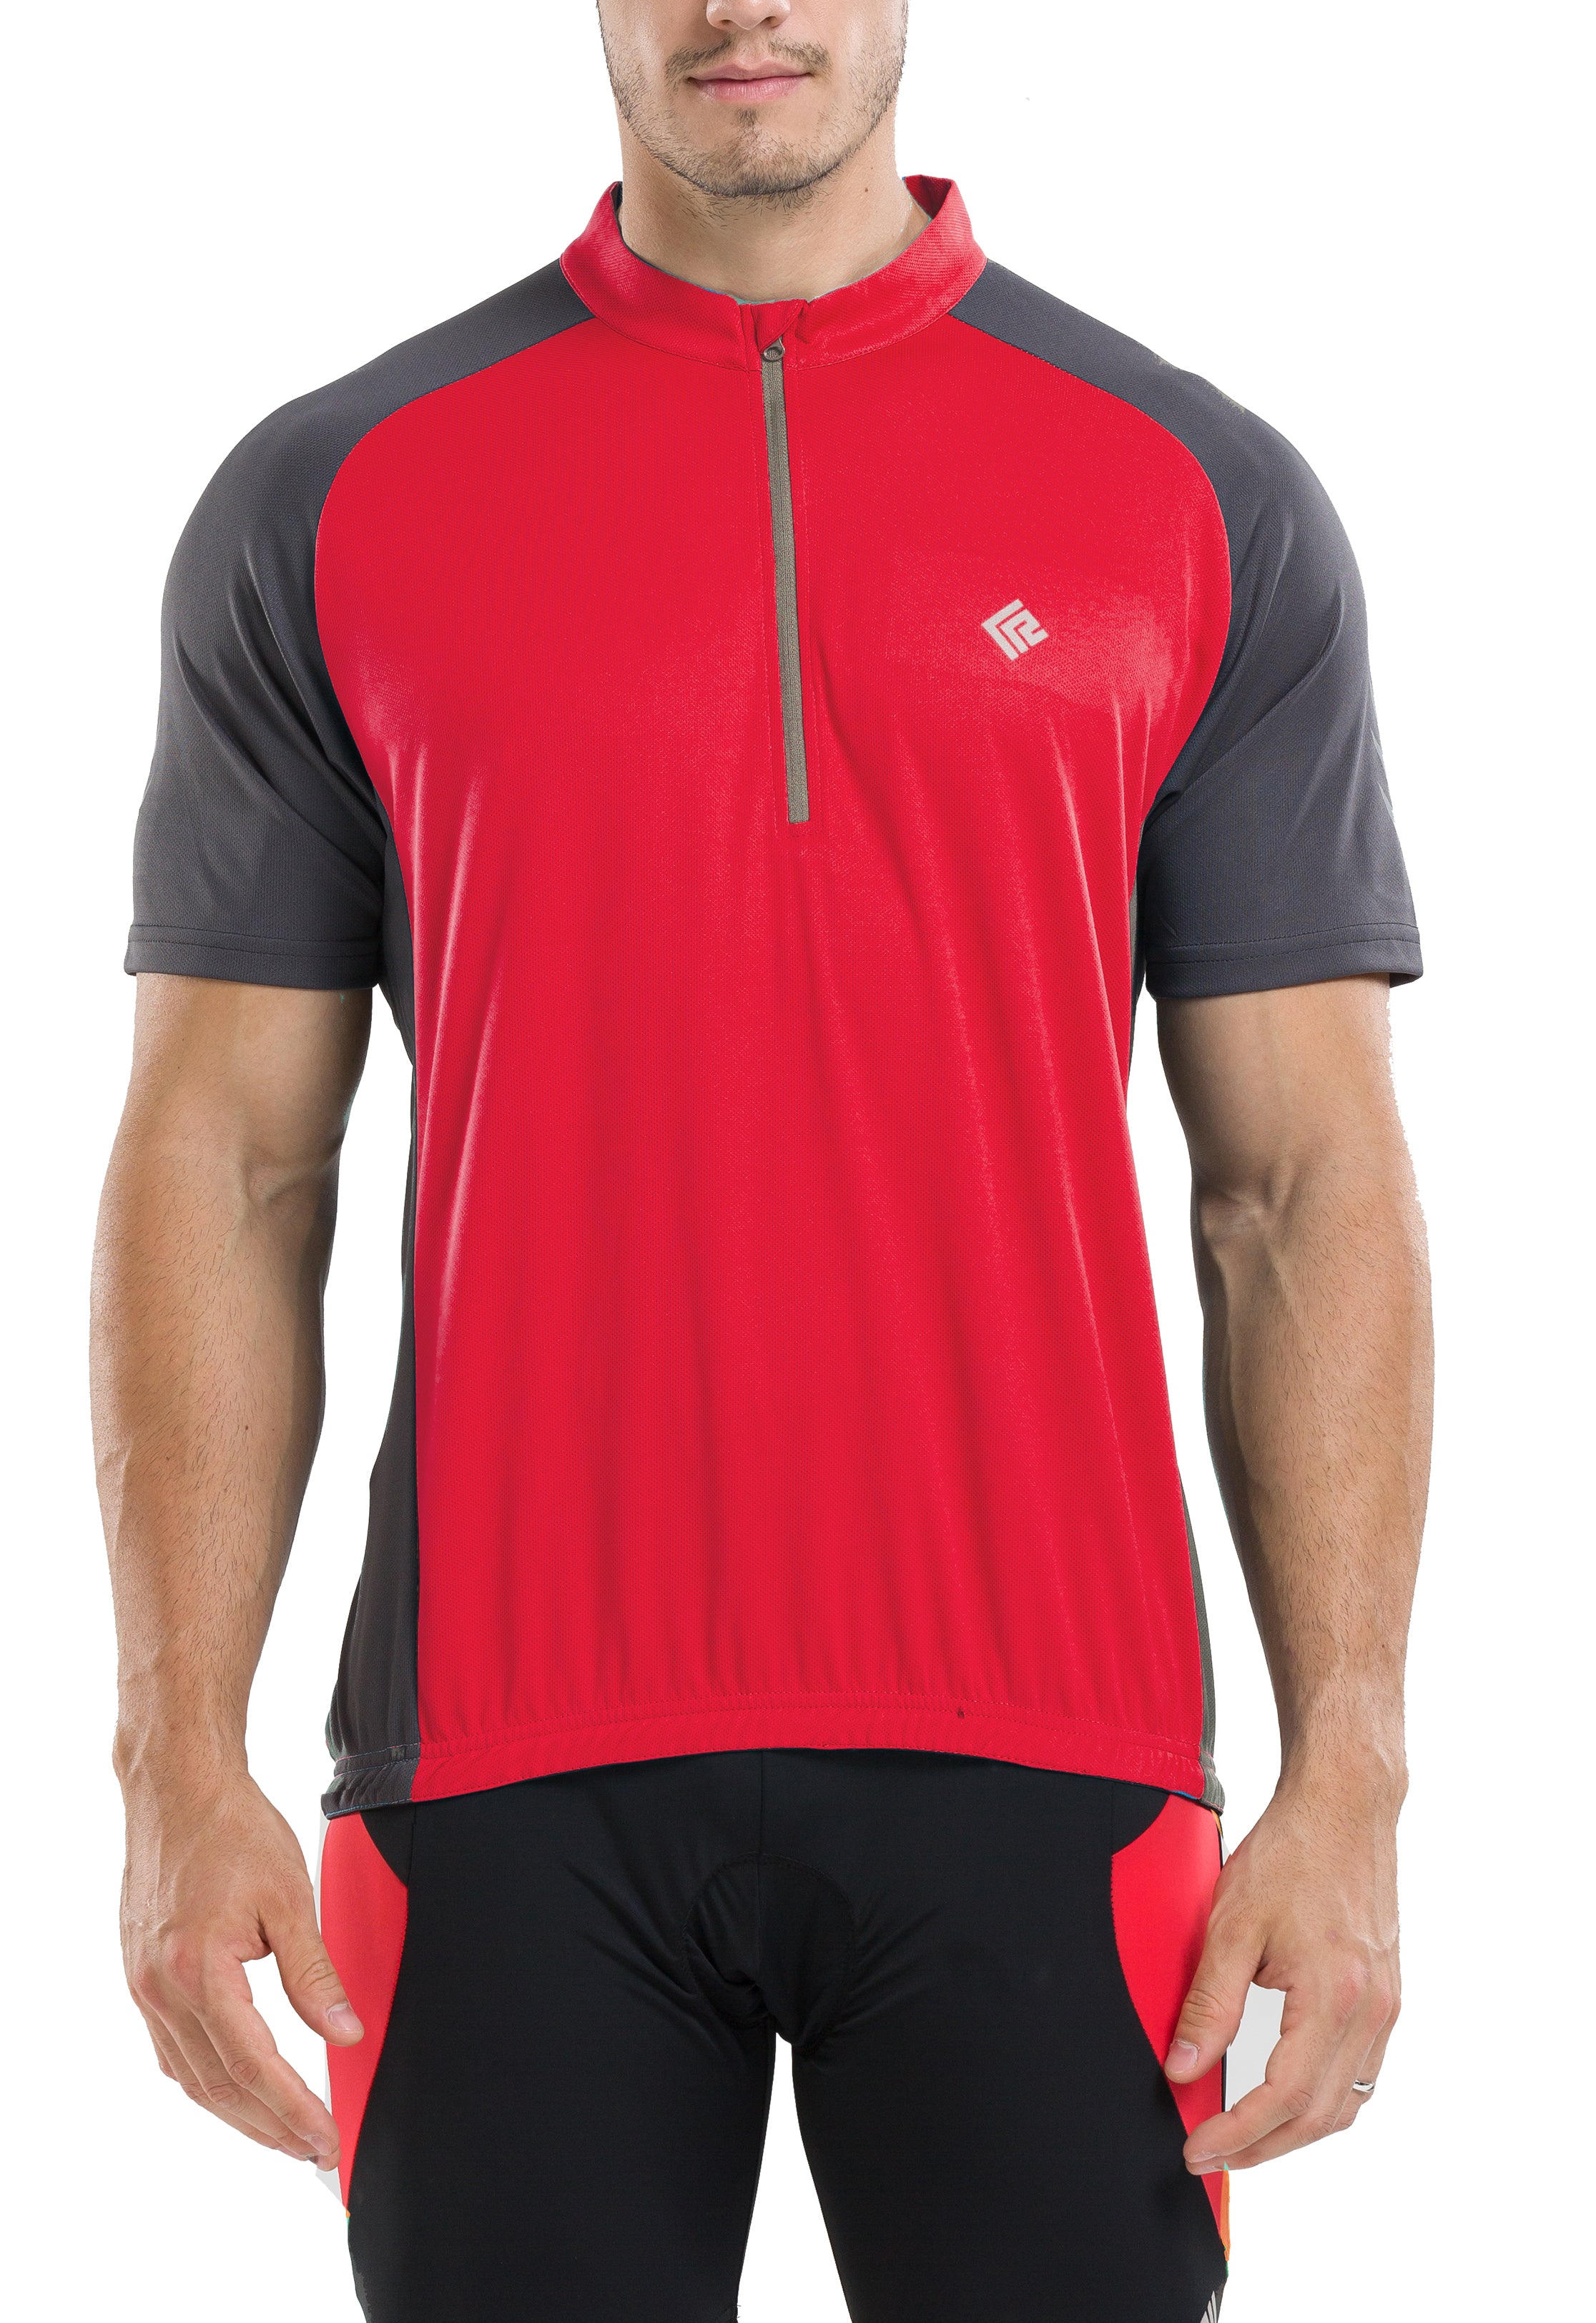 Mens Short Sleeve Cycling Jersey Lifestyle Heart Red - C2 *